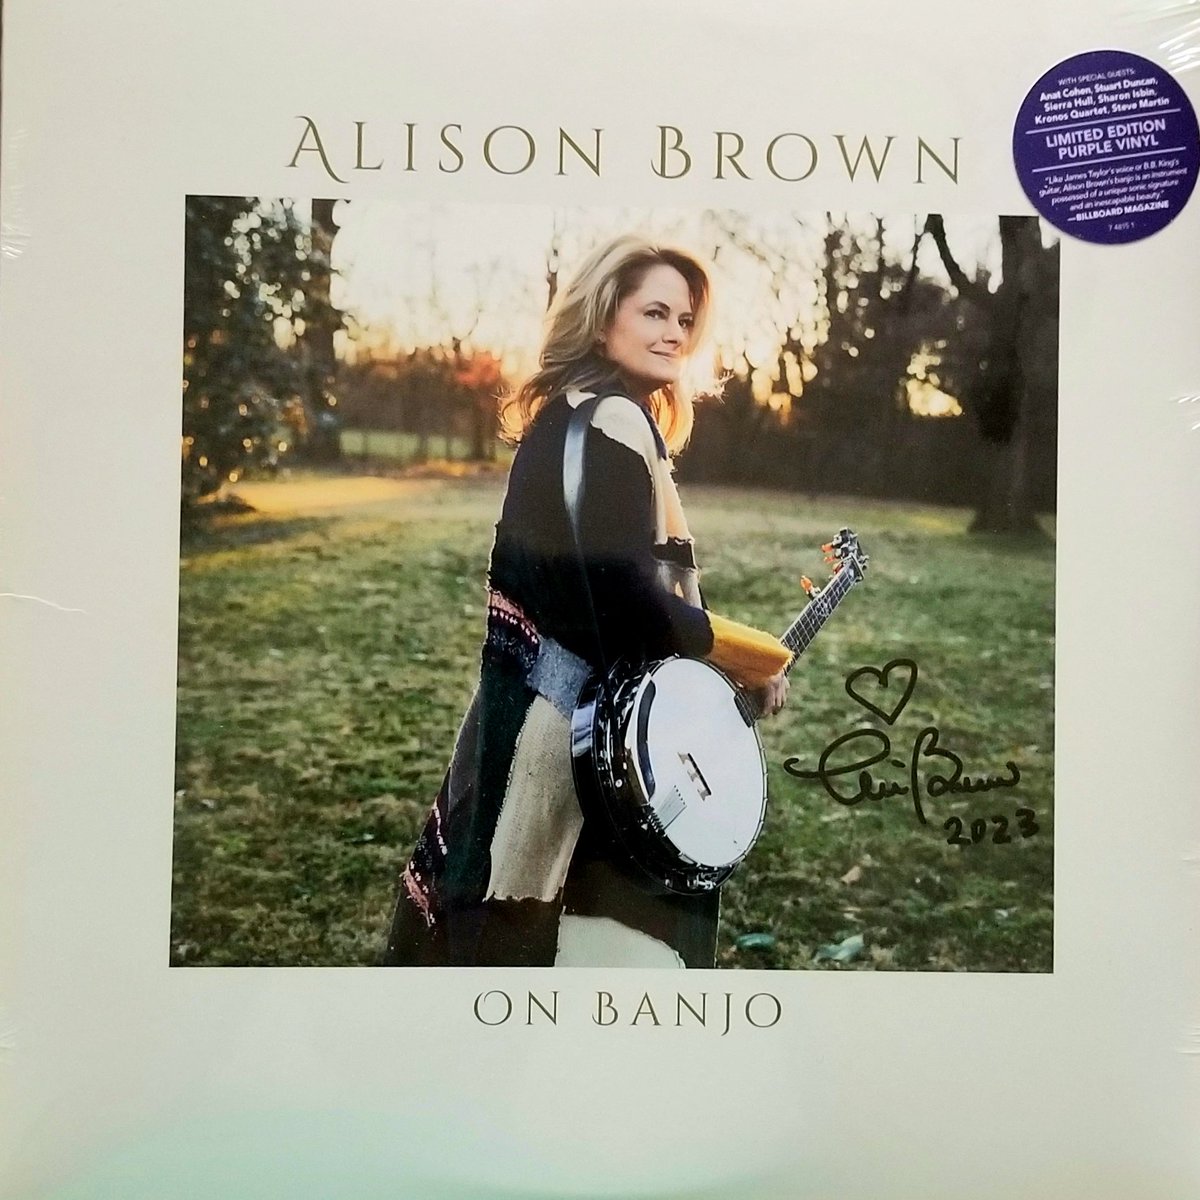 Just added to the podcast 'Steve Martin's Unreal Bluegrass' on Spotify a wonderful show with Alison Brown @alisononbanjo . One of my favorite guests and one of the world's best banjoists. 'On Banjo' is a spectacular collection of music showcasing her vast influences, released on…